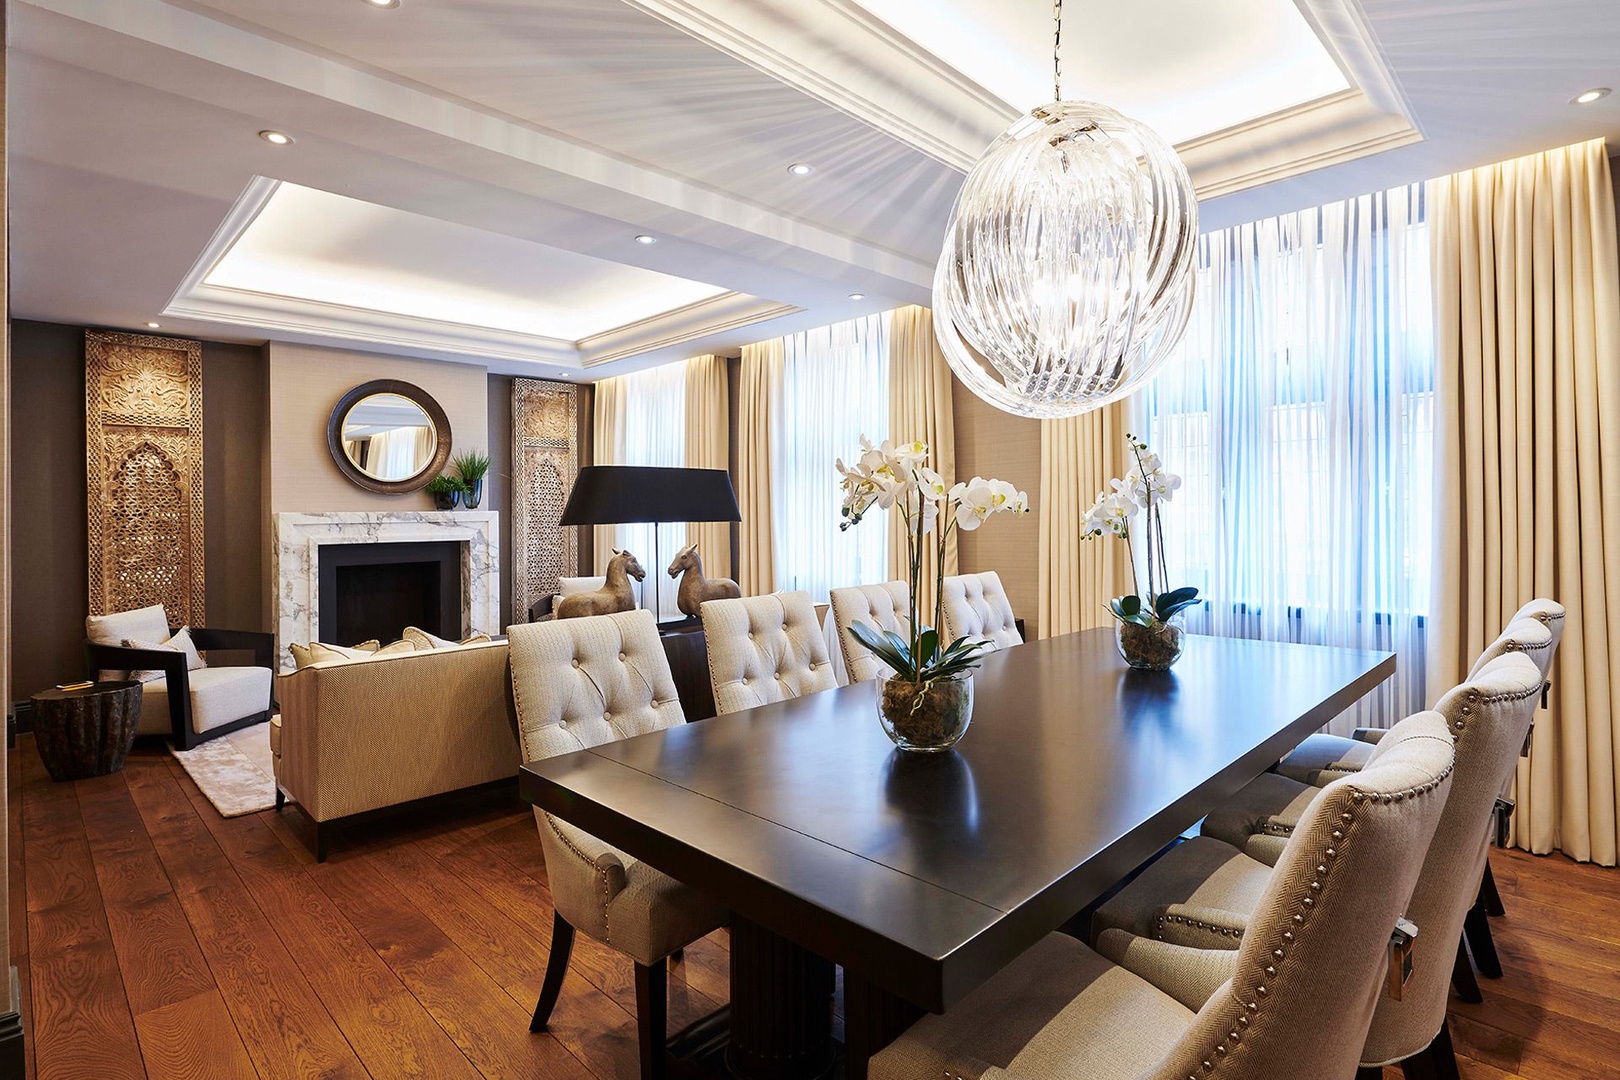 Spacious living area with ornate mantelpiece